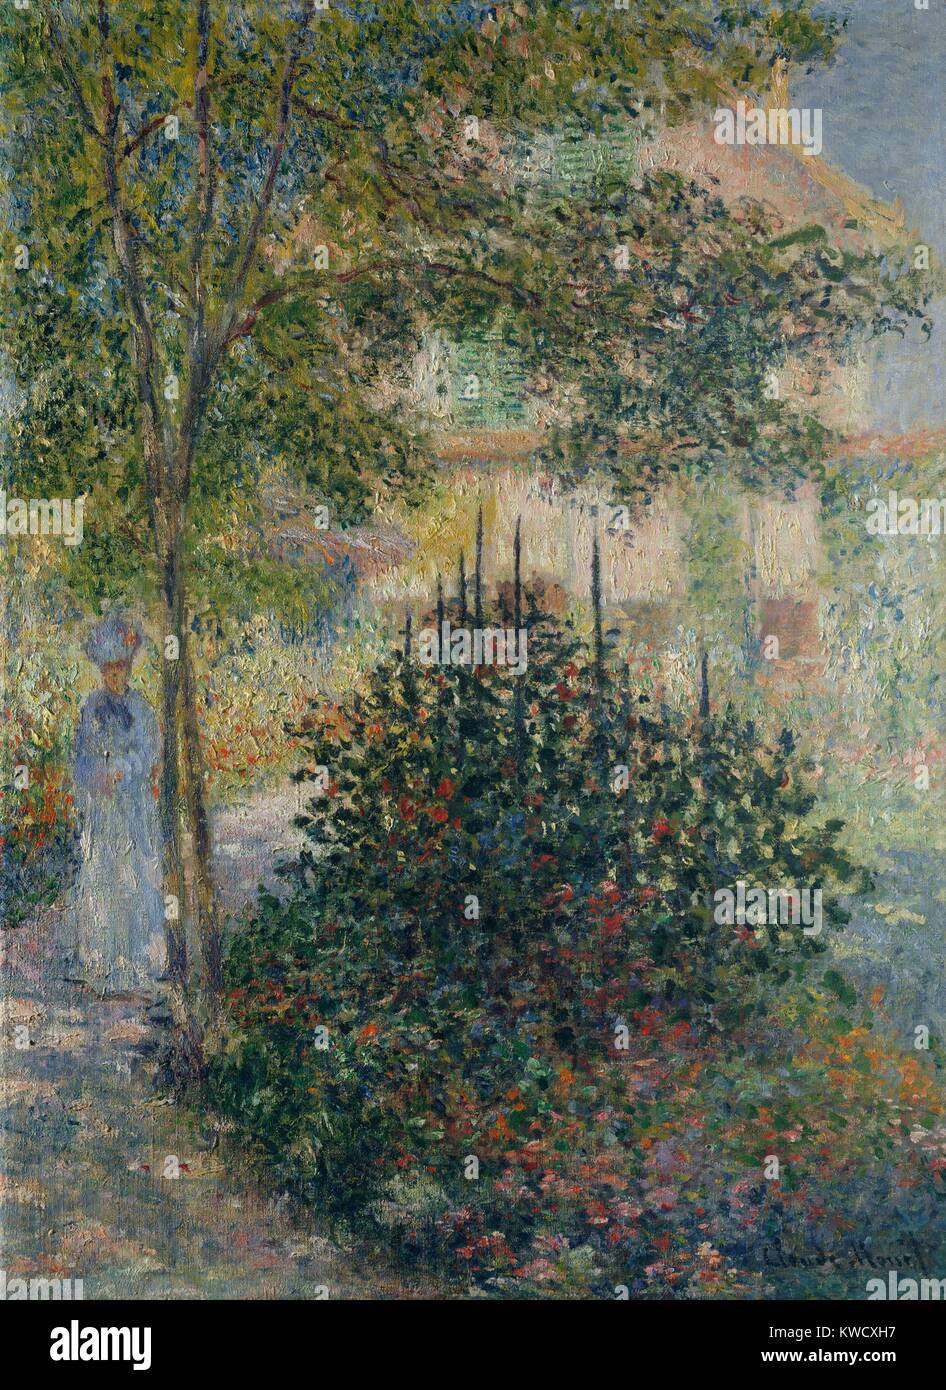 Camille Monet in the Garden at Argenteuil, by Claude Monet, French impressionist oil painting. Monet applied the paint in small daubs over the entire canvas, a style that became characteristic of his mature works (BSLOC 2017 3 25) Stock Photo